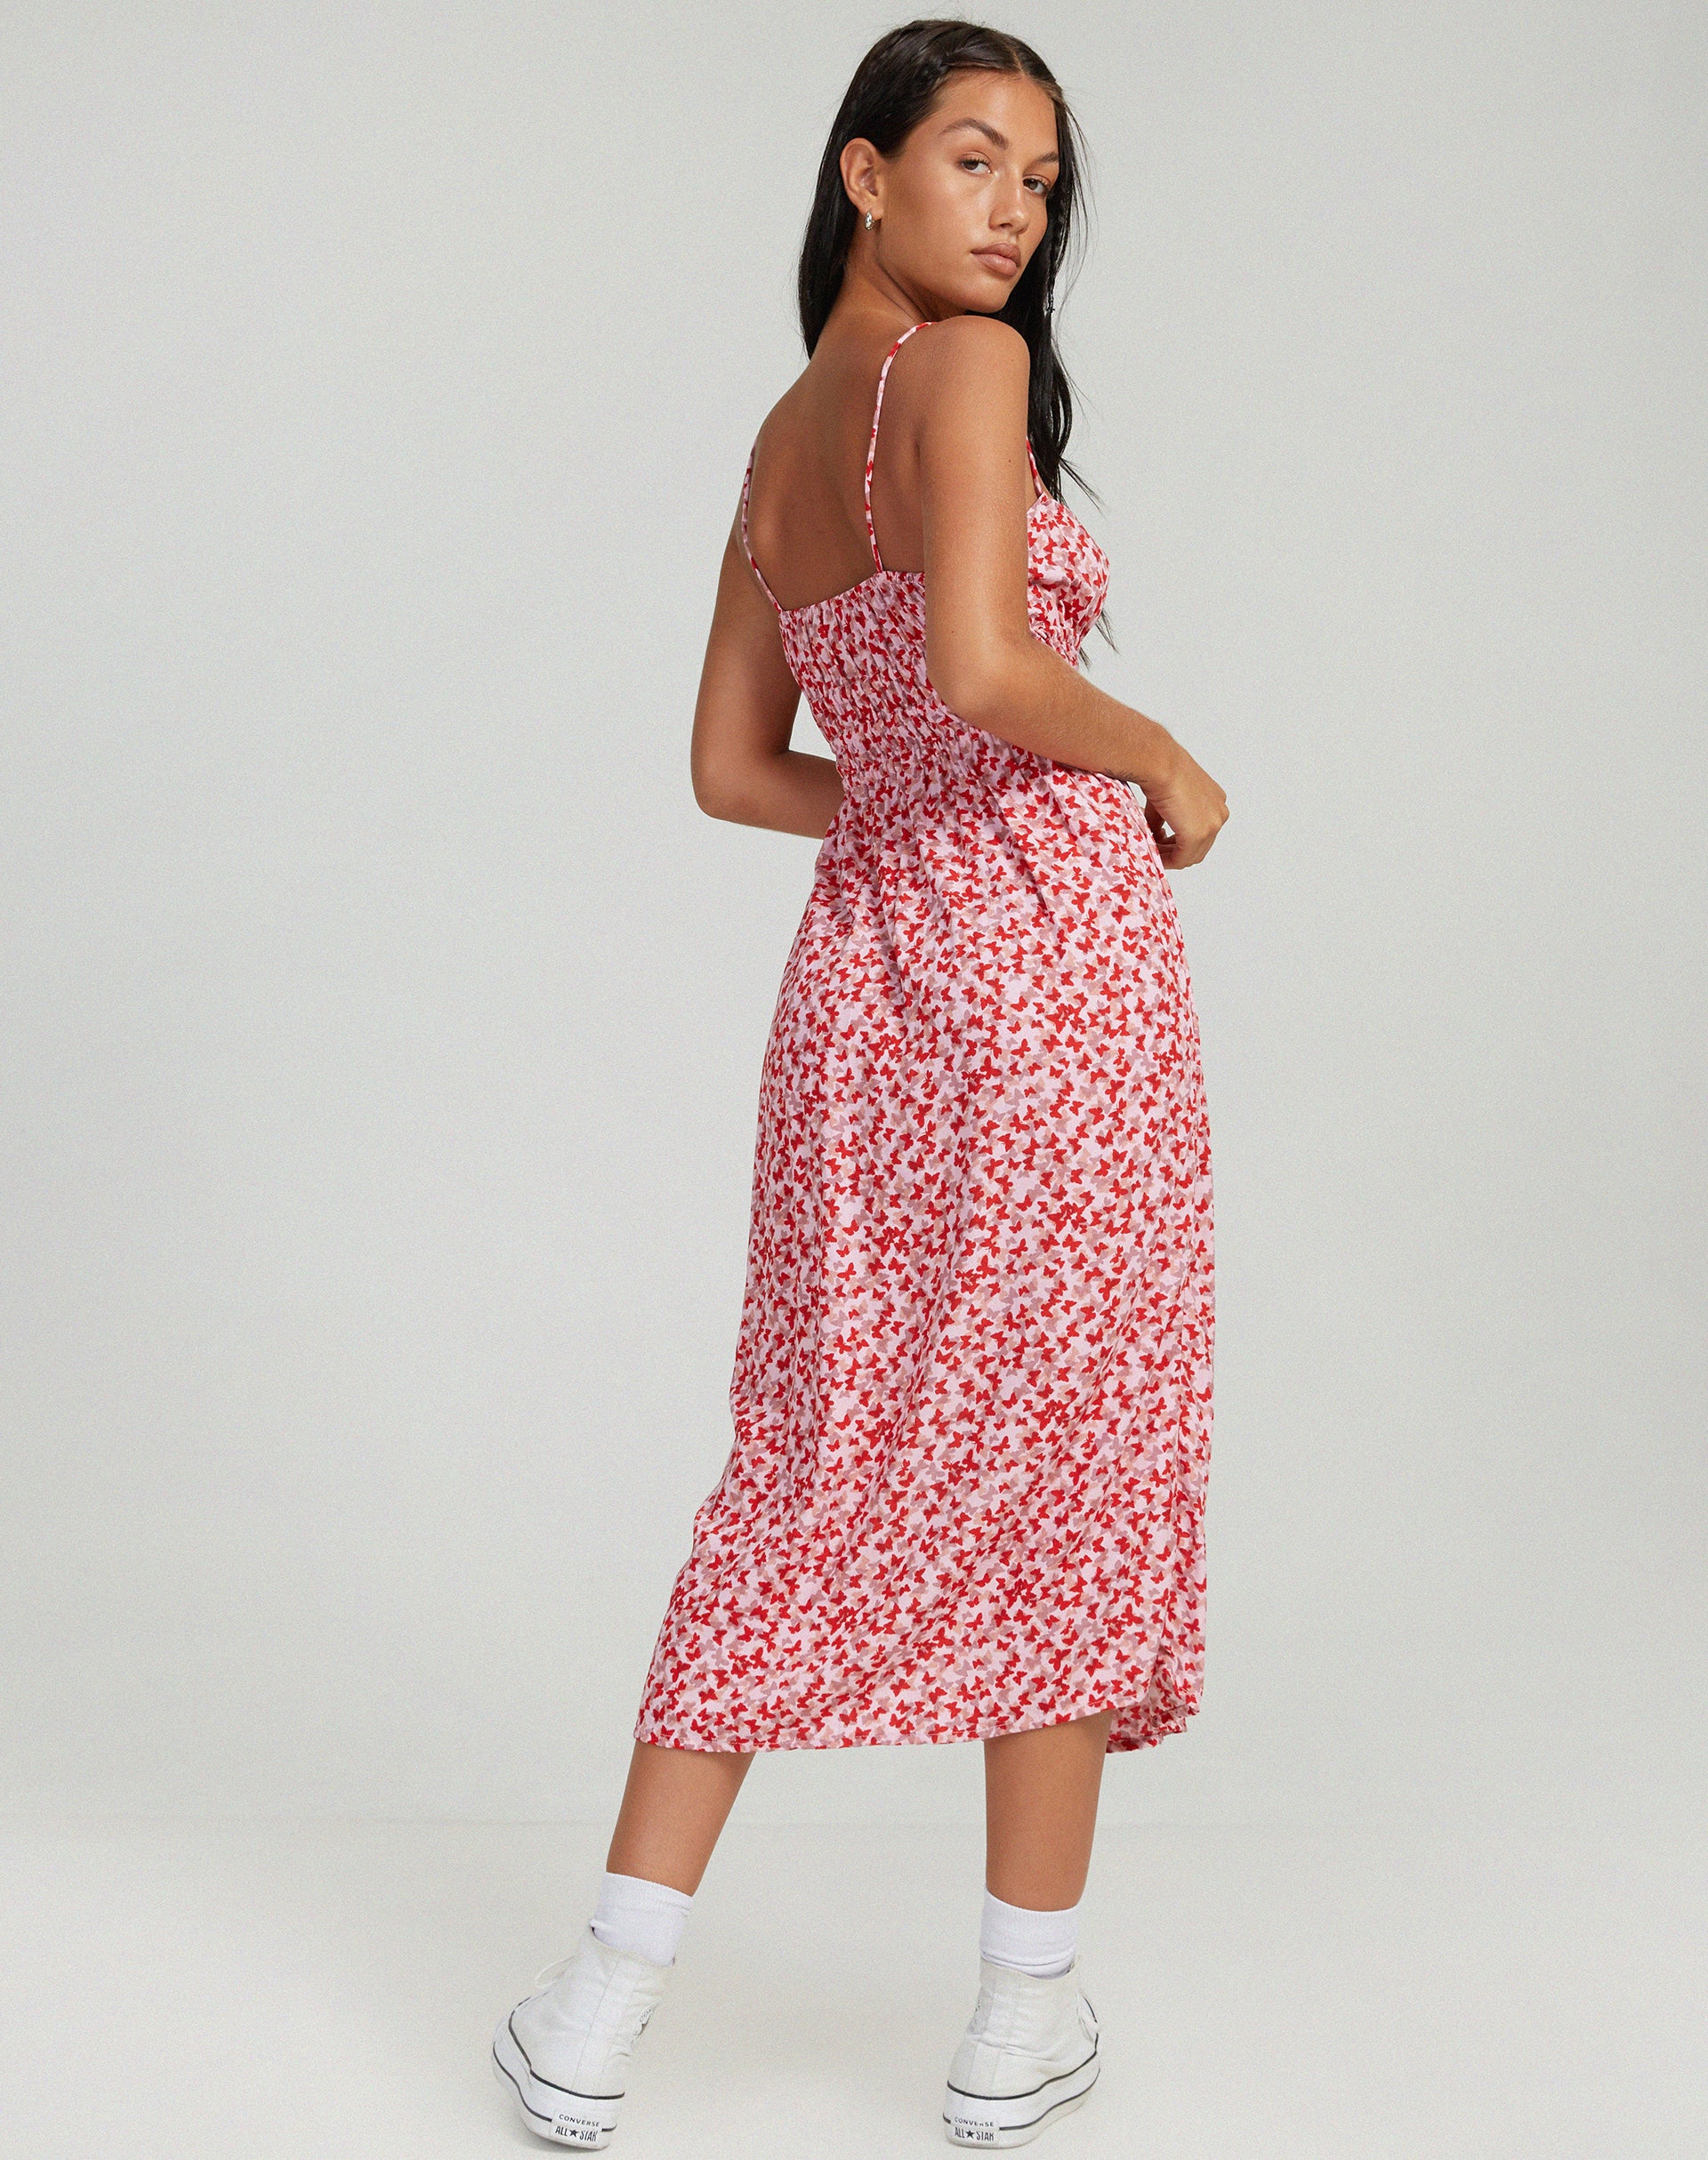 image of Jeyro Midi Dress in Ditsy Butterfly Peach and Red